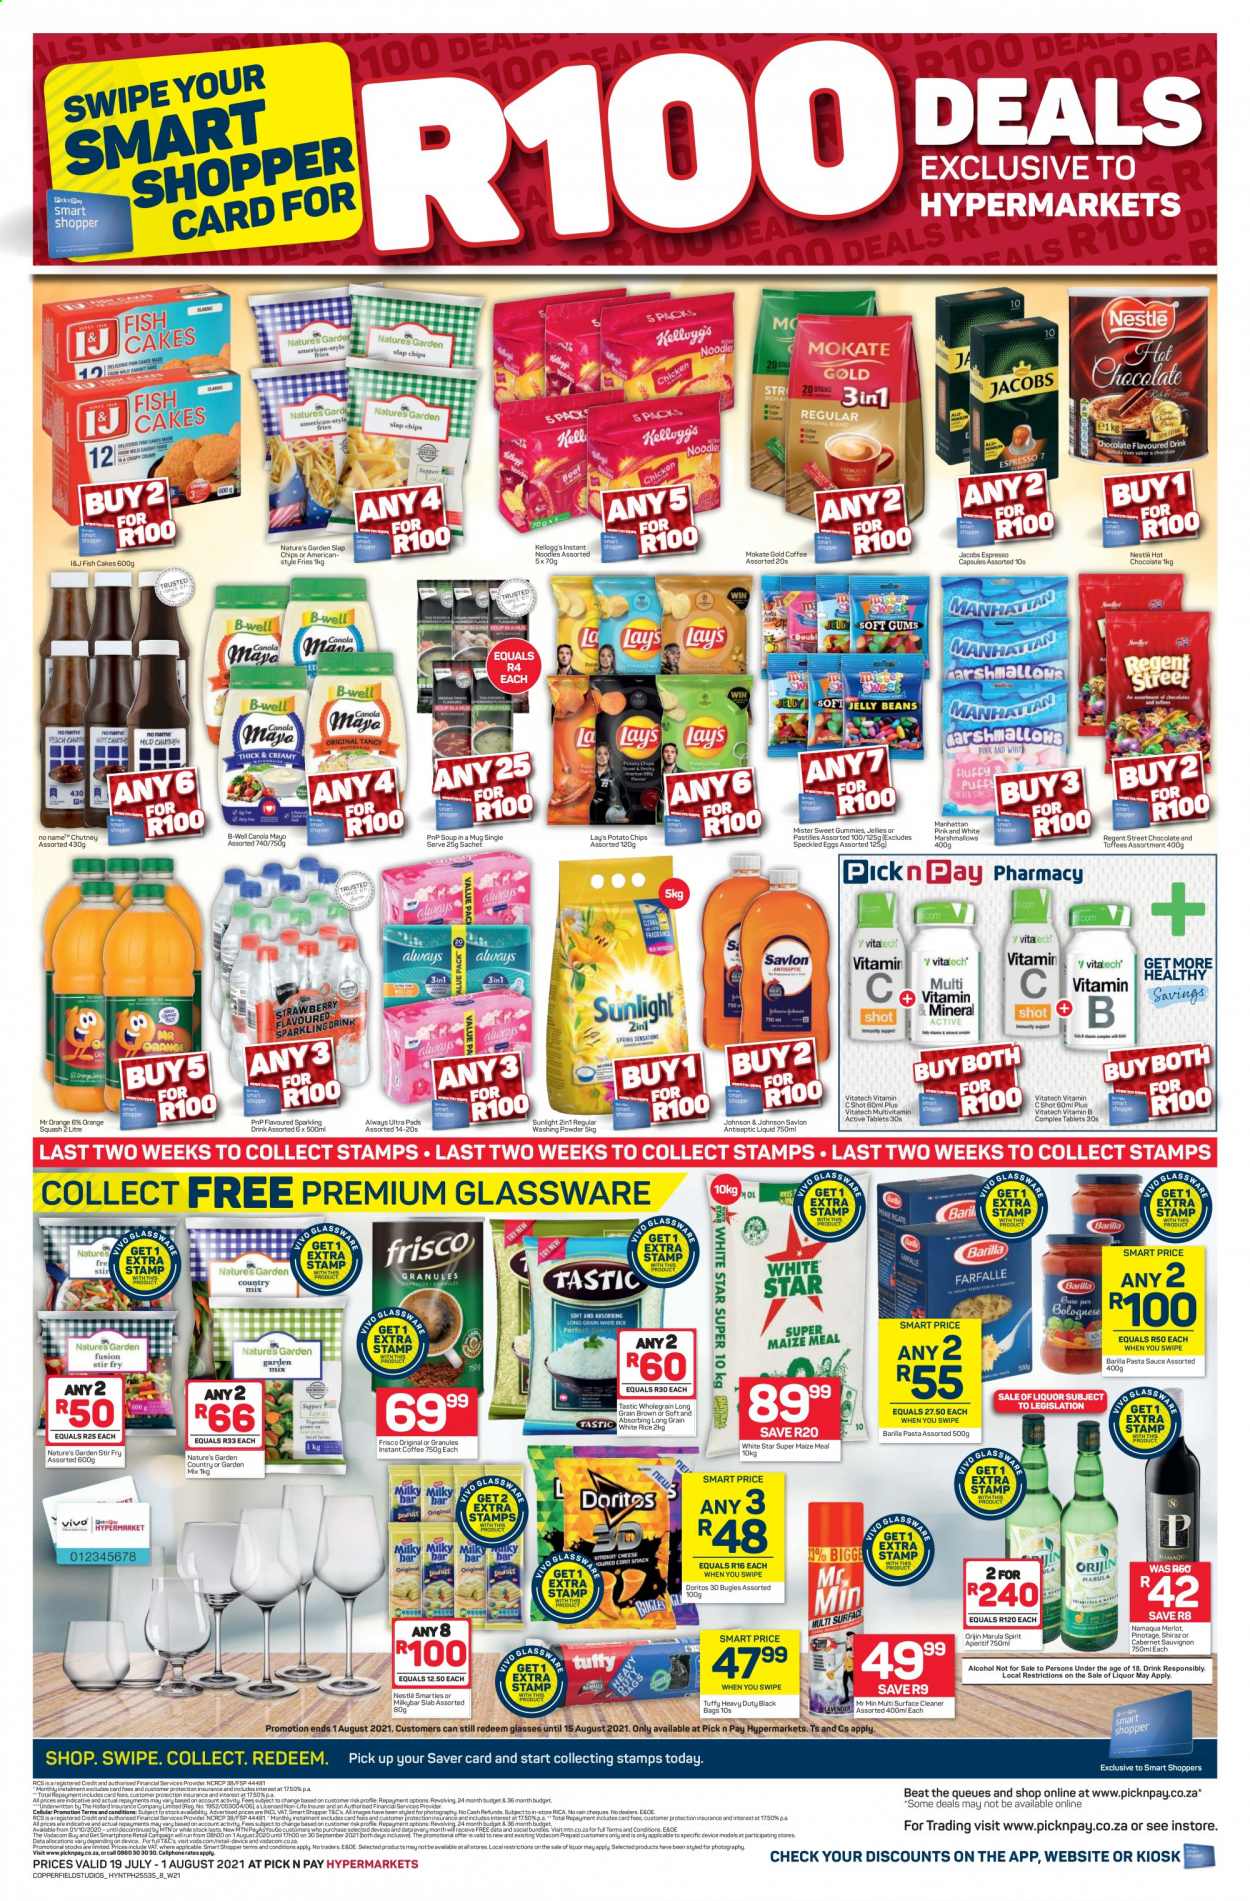 Pick n Pay specials - 07.19.2021 - 08.01.2021. 